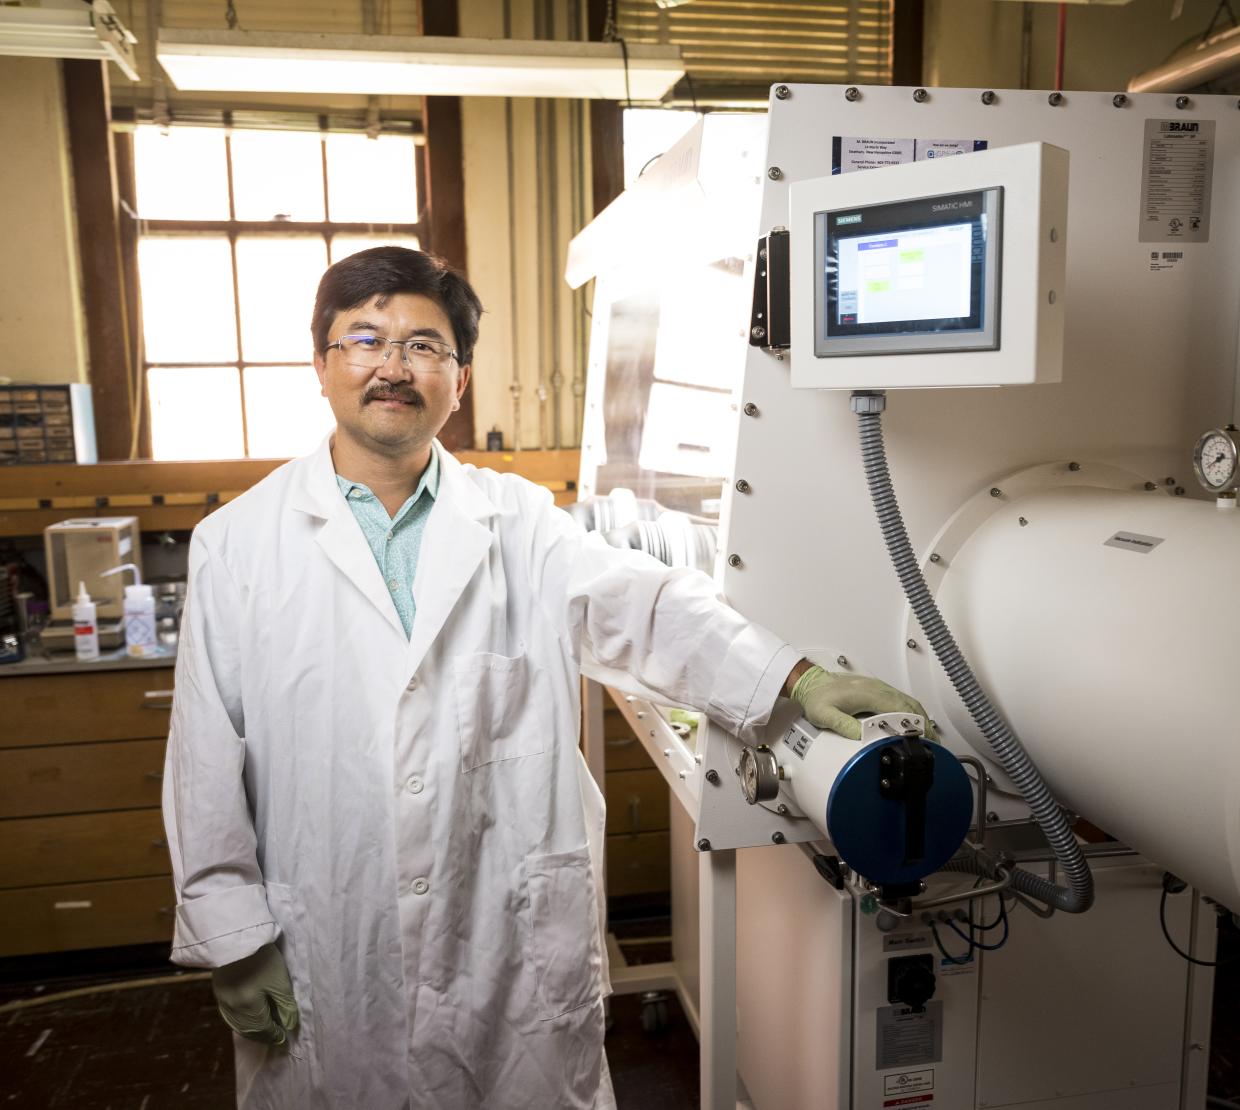 A man in a lab coat stands in front of a white machine used for battery science.